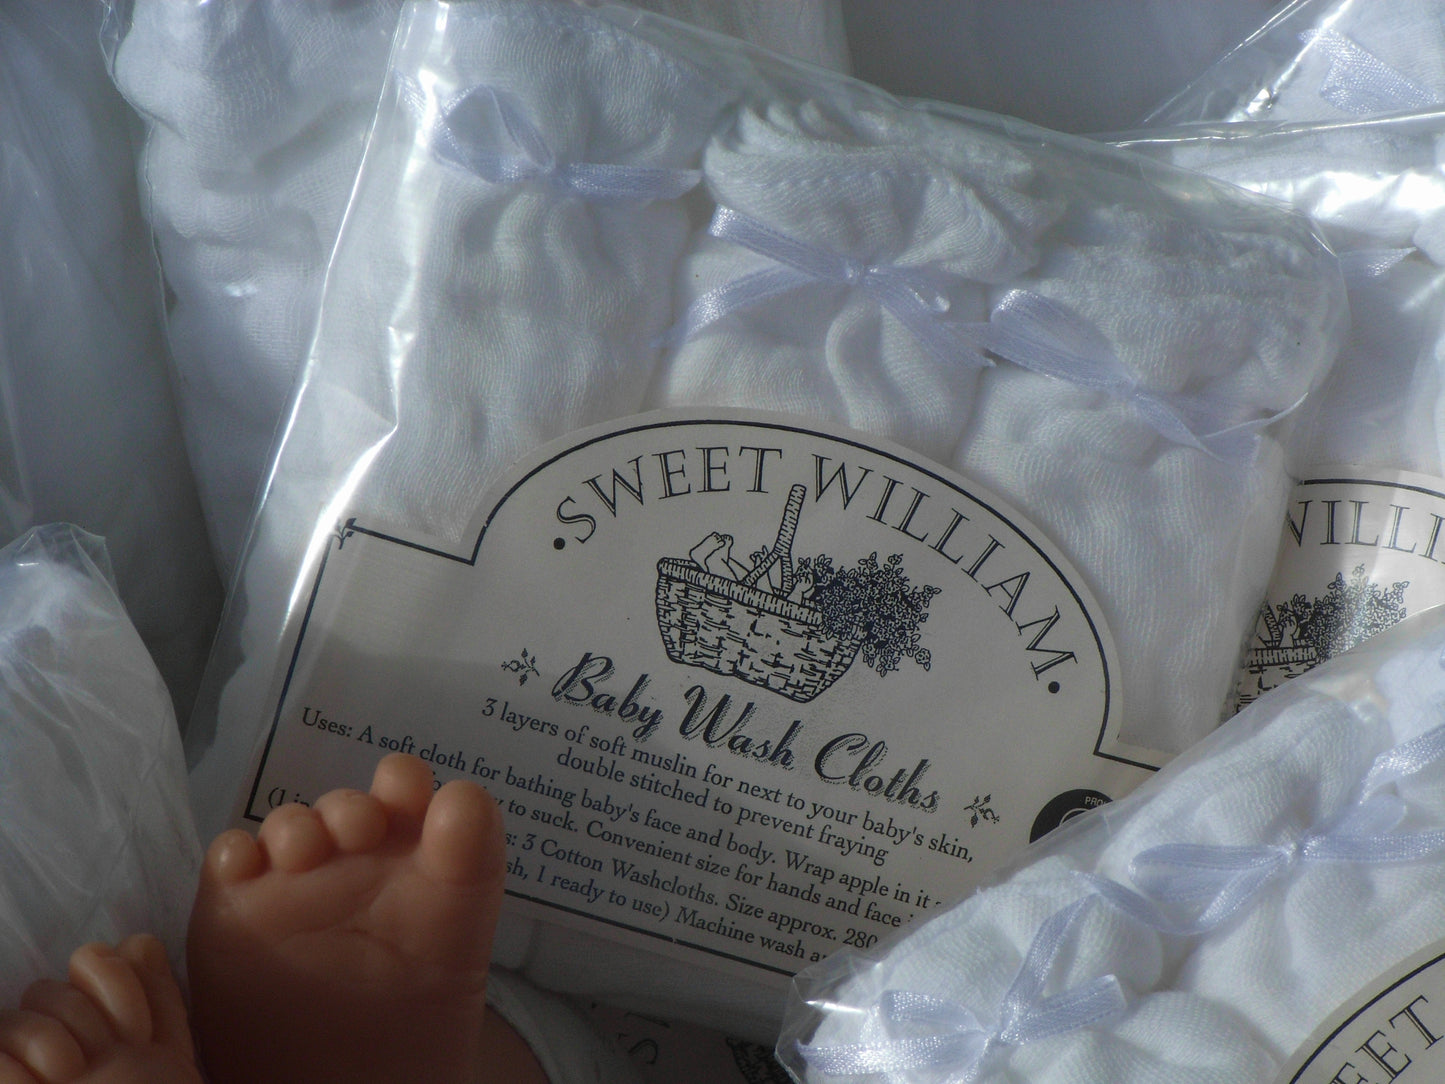 Sweet William Baby Wash Cloths - 3 pack